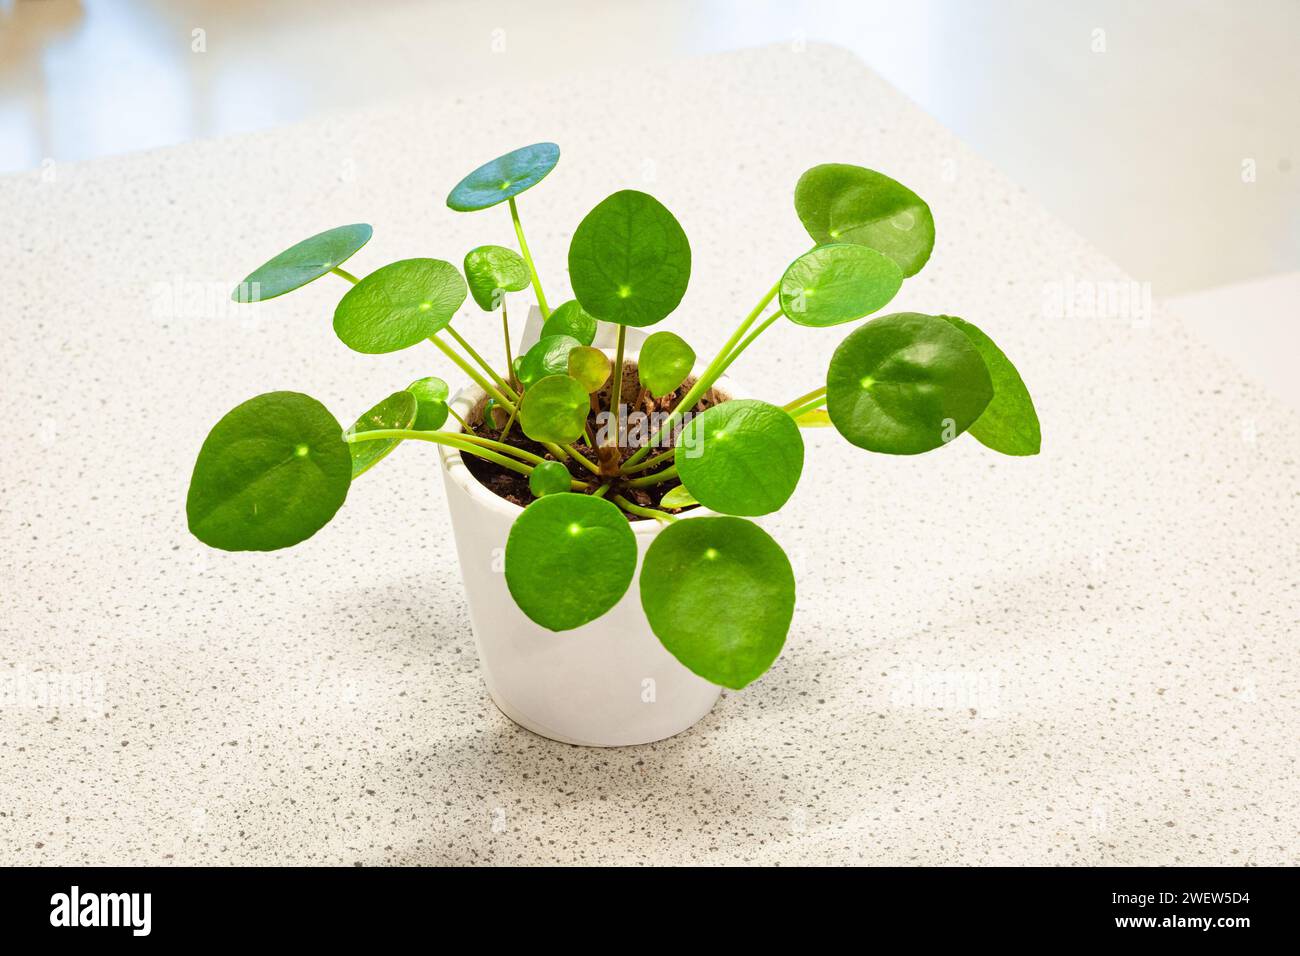 Chinese money plant, also known as pancake plant (Pilea peperomioides) with decorative green leaves on a table Stock Photo